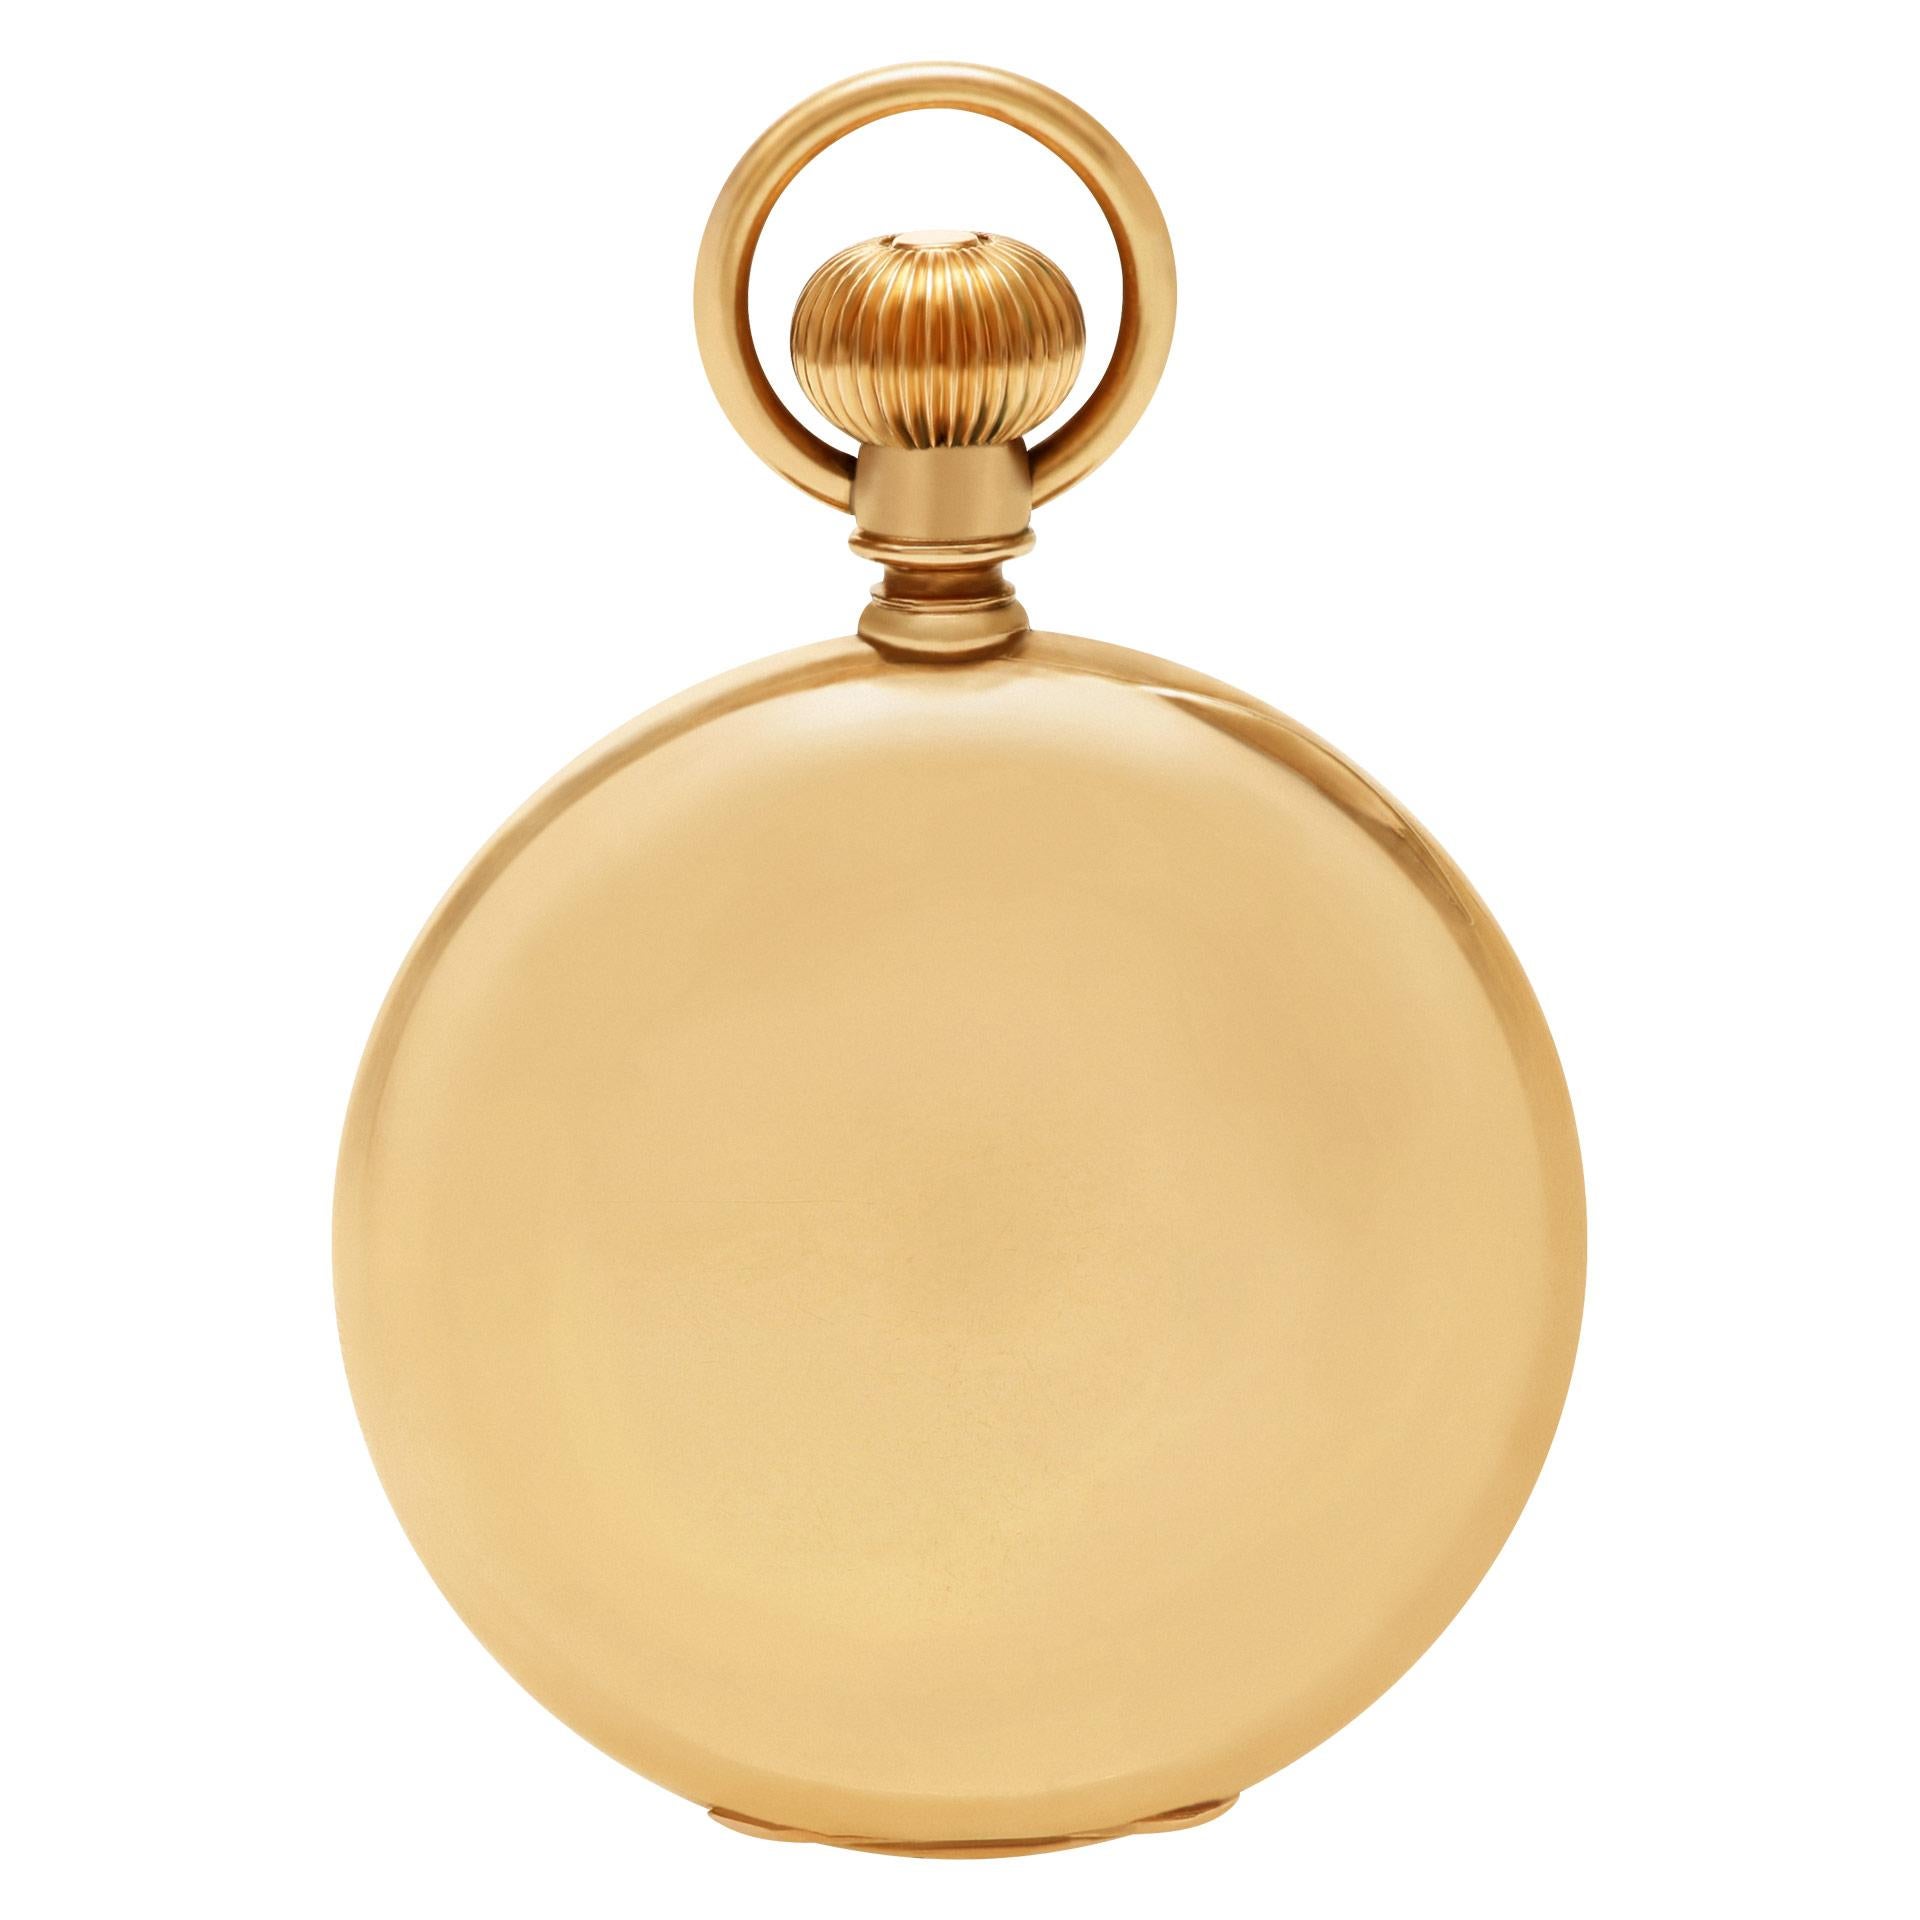 Rockford hunting case pocket watch with porcelain dial morning glory hands in 14k yellow gold. Manual 15 jeweled movement with sub-seconds. 38mm. Circa 1910s. Fine Pre-owned Rockford Watch.

Certified preowned Vintage Rockford pocket watch watch is